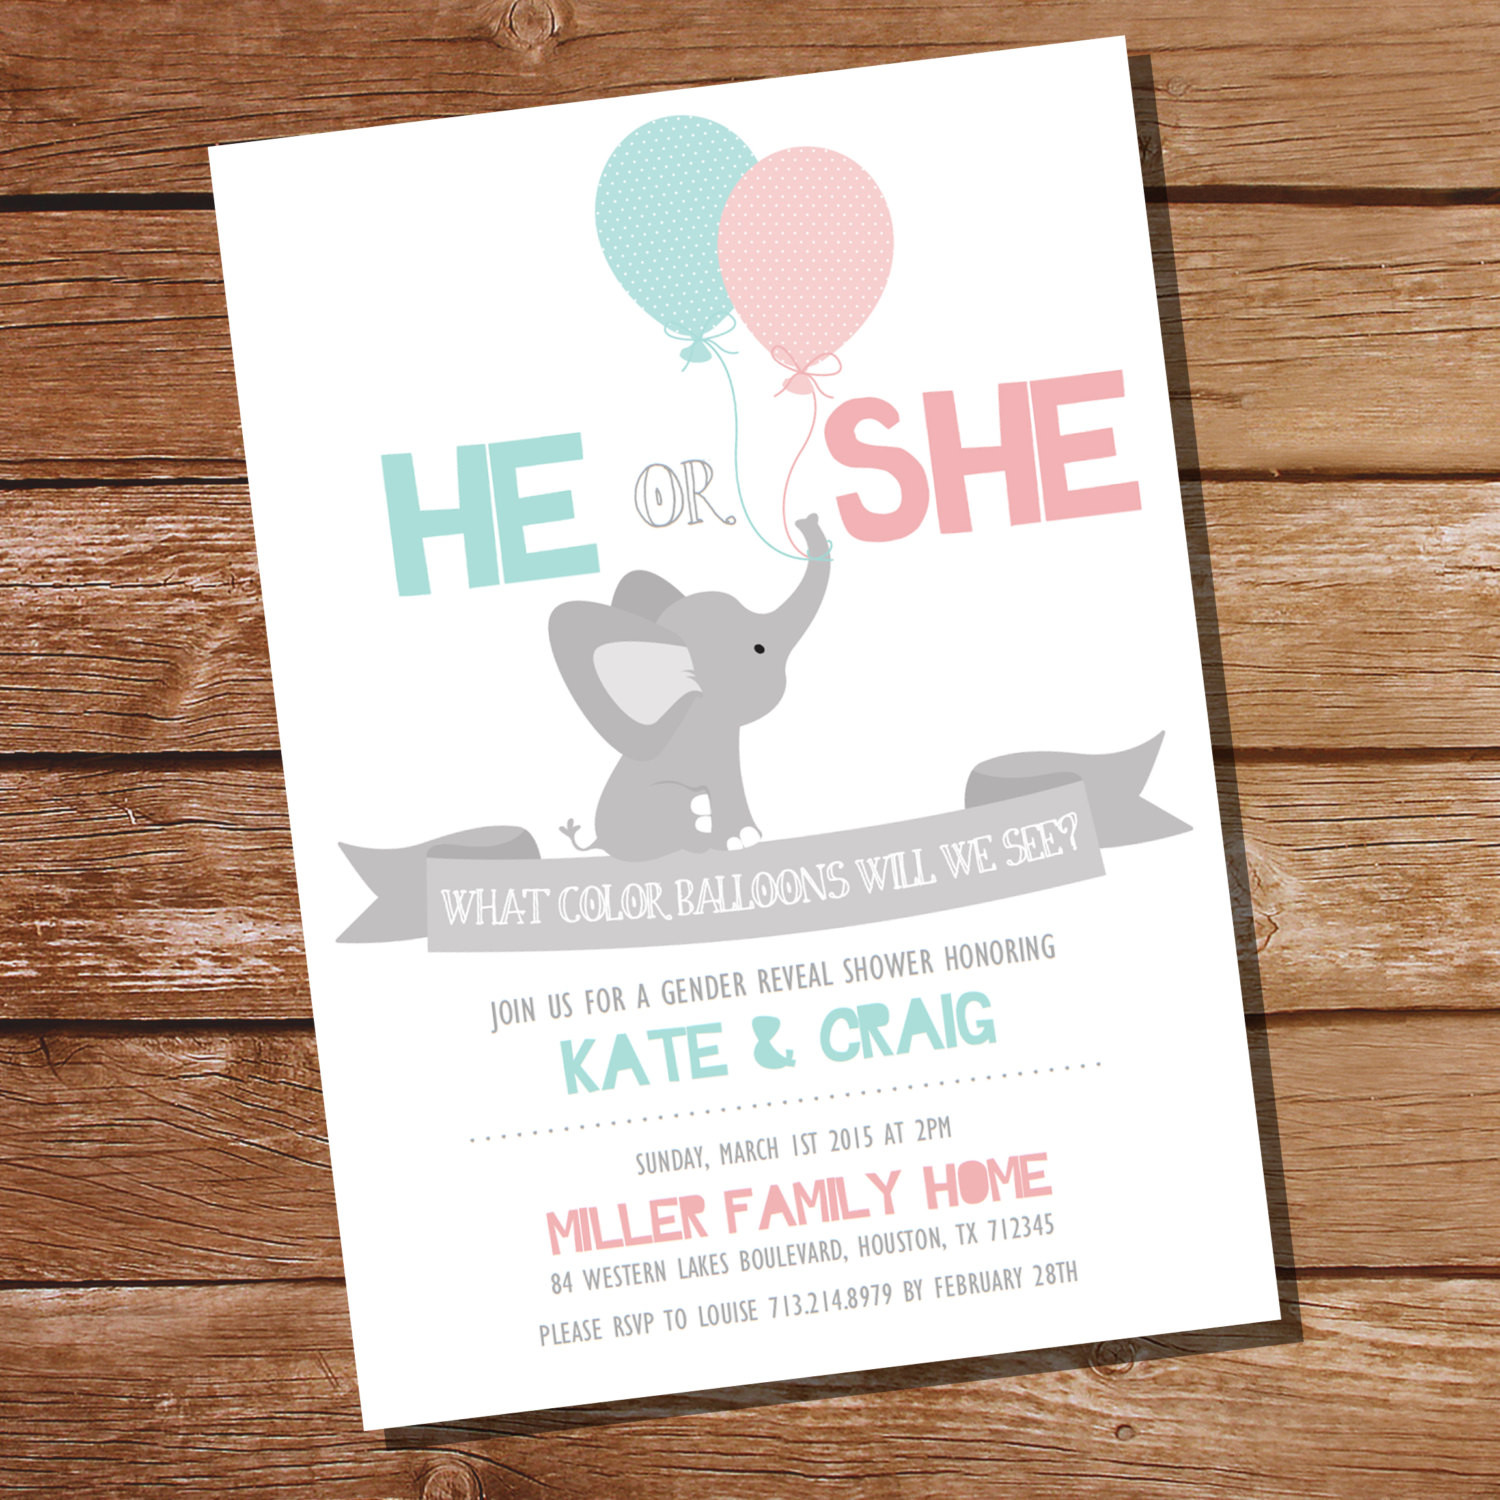 Gender Reveal Party Invitation Ideas
 He or She Gender Reveal Party Invitation Elephant Gender